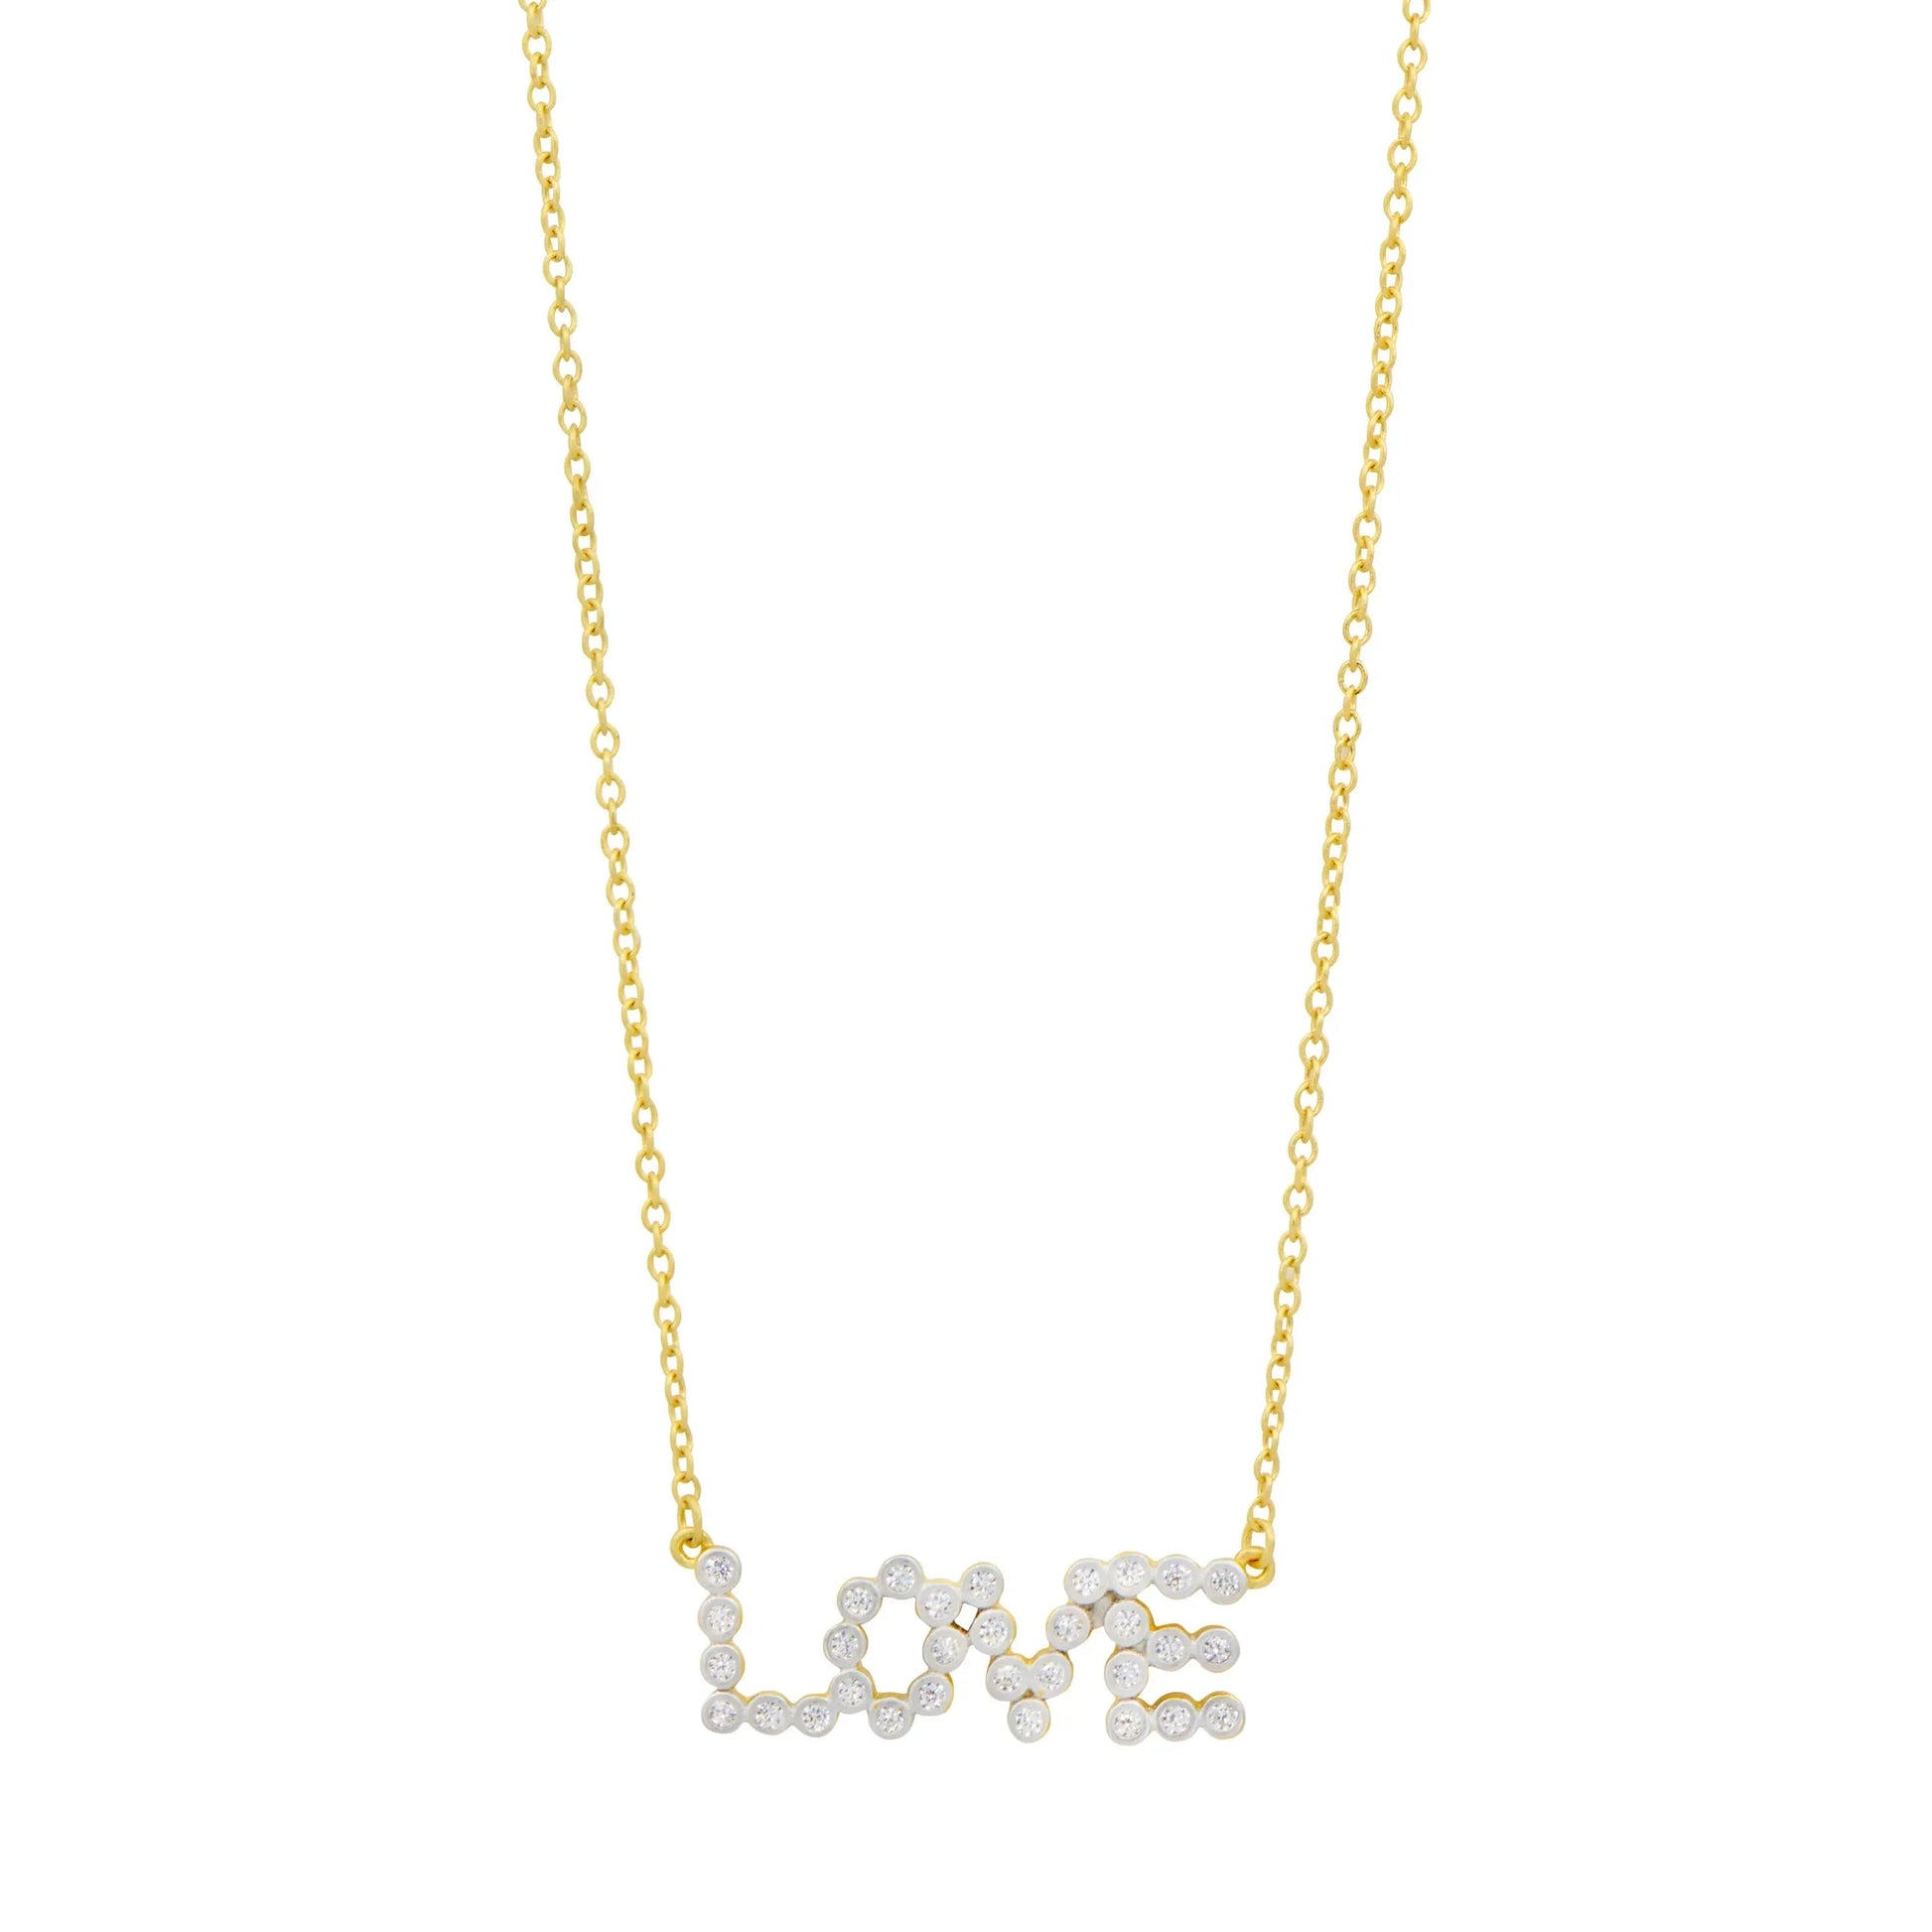 GoldSilver Sparkling Love Necklace Women of Strength NECKLACE